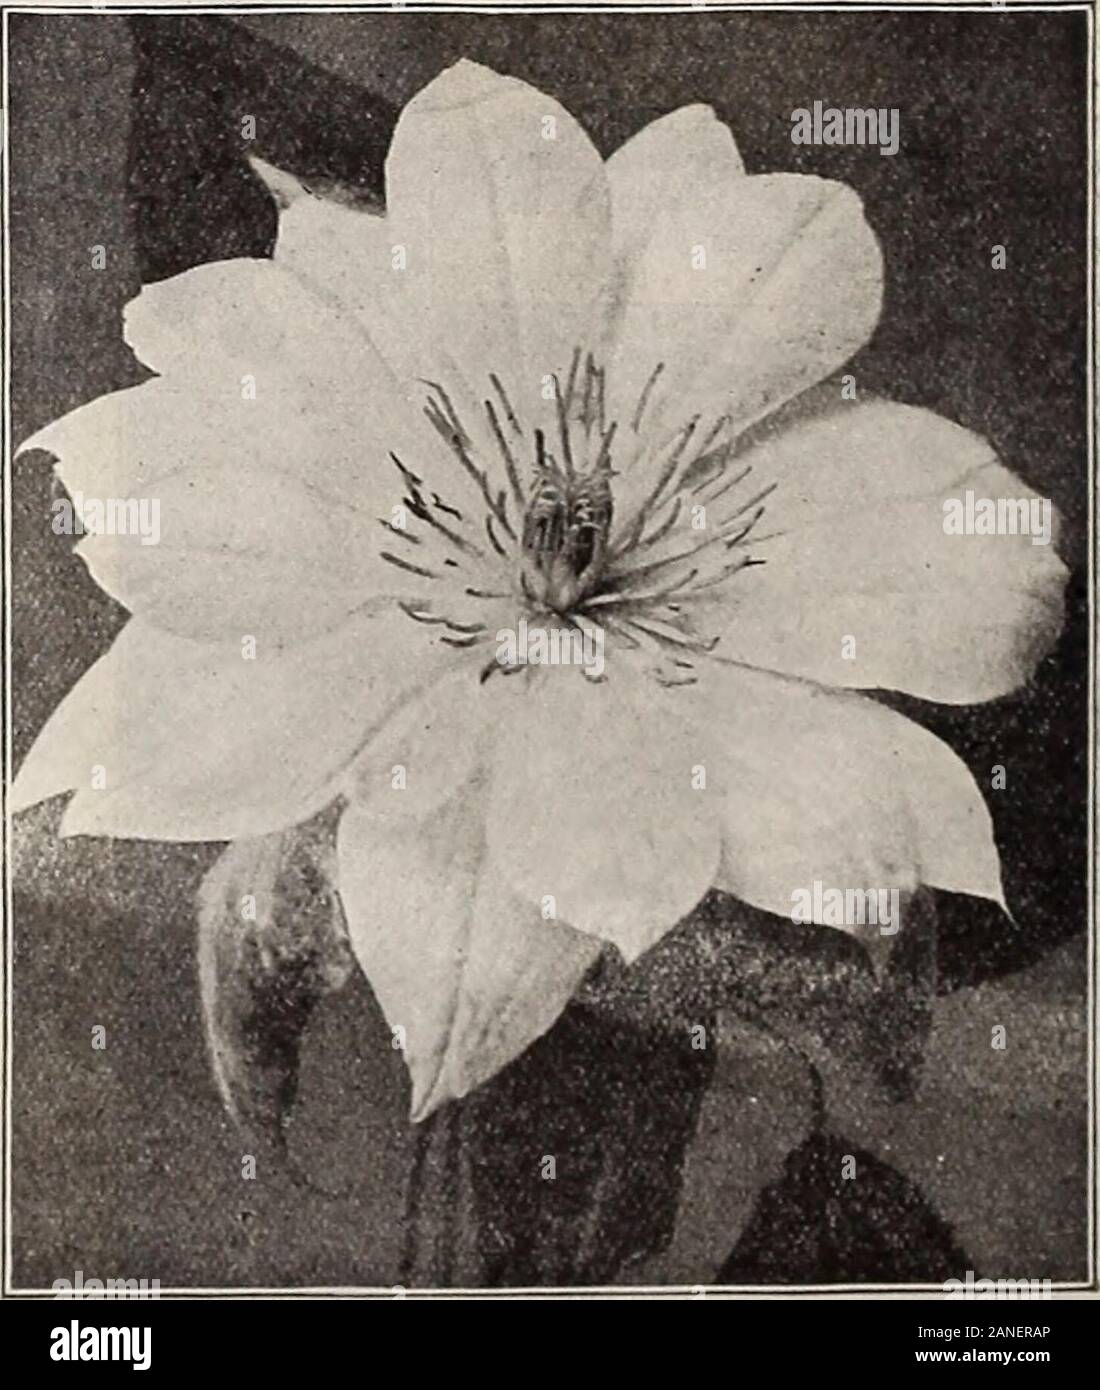 Dreer's 72nd annual edition garden book : 1910 . BiGN.N-IA Ghandiflora. BIGISOISIA. (Trumpet Creeper.) For covering unsightly places, stumps, rock-work, or wher-ever a showy-flowering vine is desired, the Bignonias will befound very useful. The flowers are large, attractive and borneprofusely when the plant attains a fair size.Grandiflora. Large flowers of orange-red. 50 cts. each: $5.00 per doz.Radicans. Dark red, orange throat, free blooming and very hardy. 25 cts. each; S2.50 per doz, CEI^ASTRrS SCAISDEIVS. Bitter Sweet or Wax Vvork.i One of our nativ e cliniliing plant-;, of rapid yrow lit Stock Photo